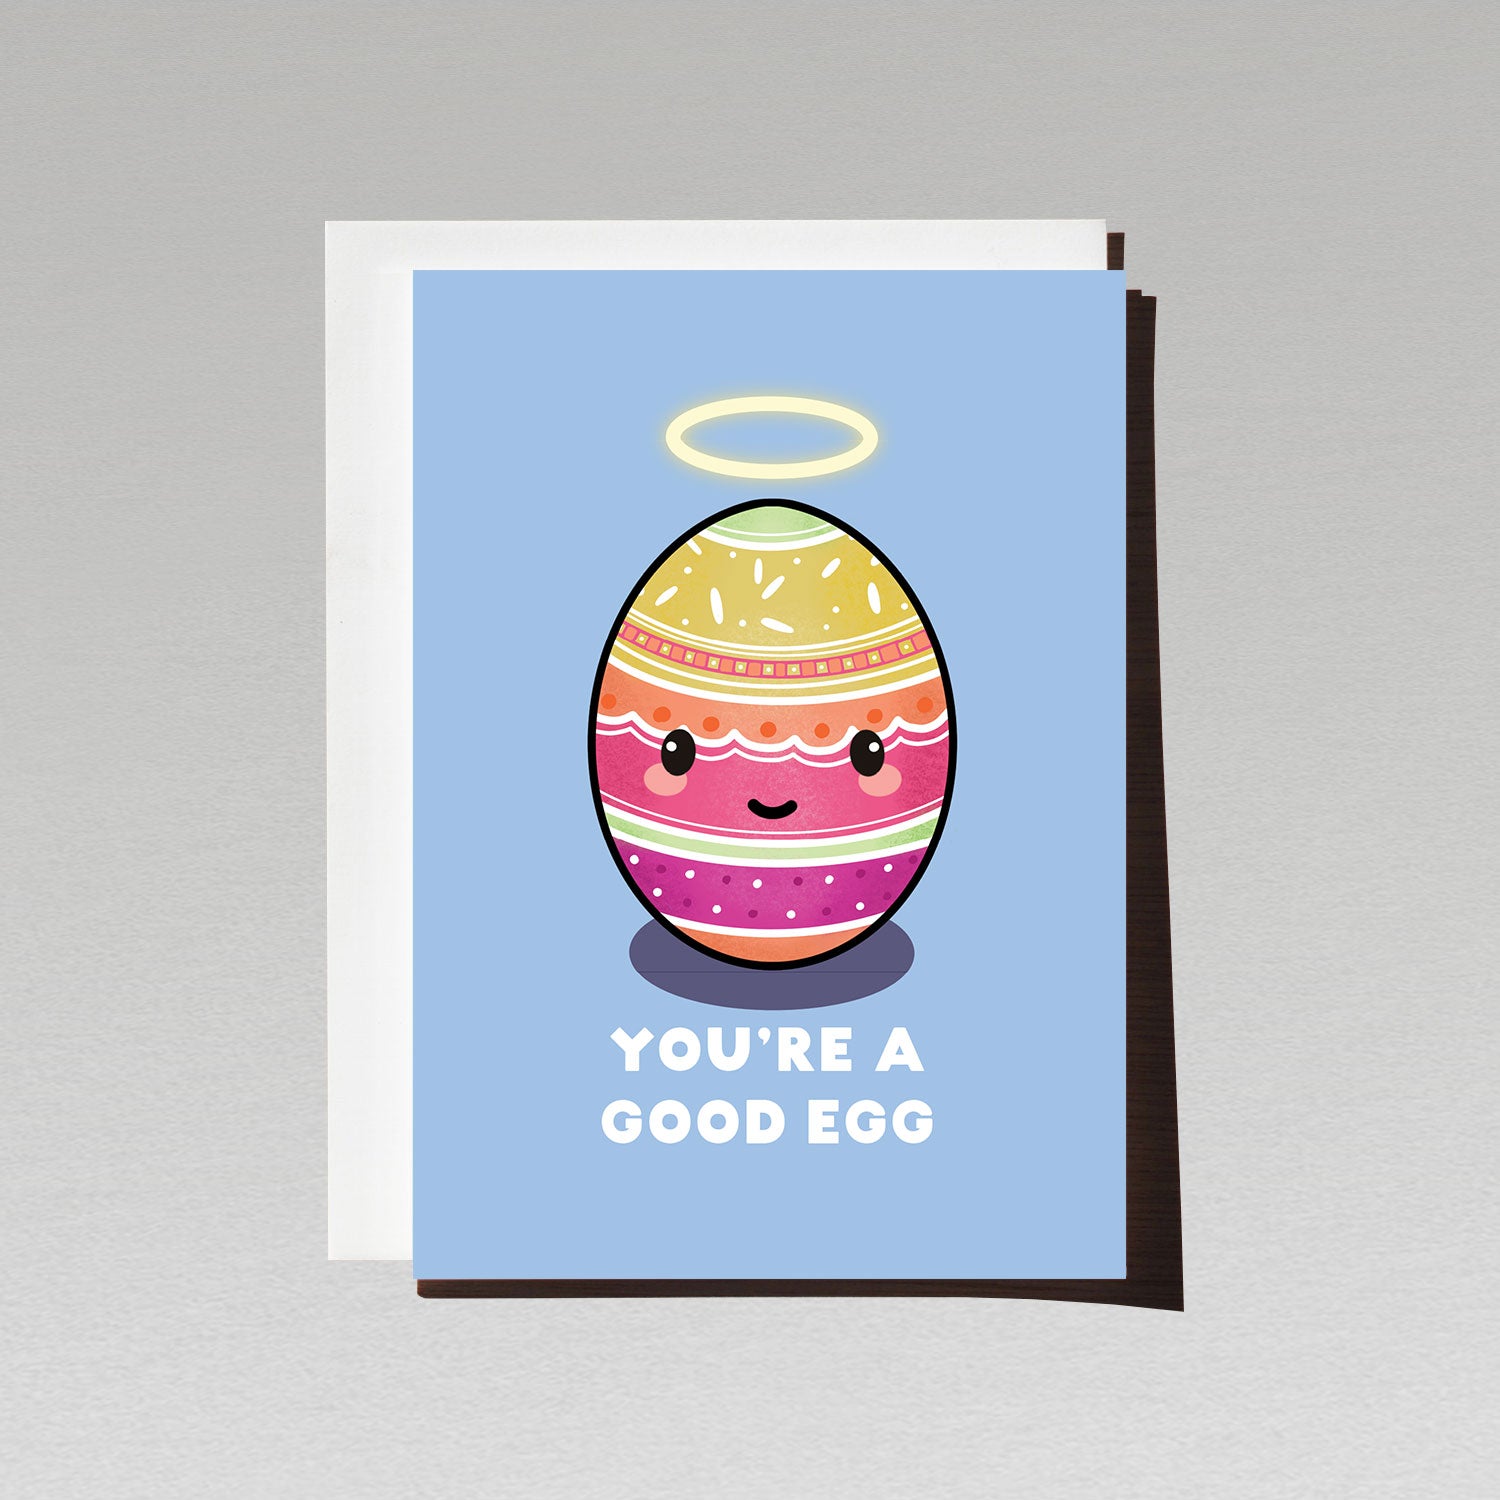 You're a good egg, Easter greeting card